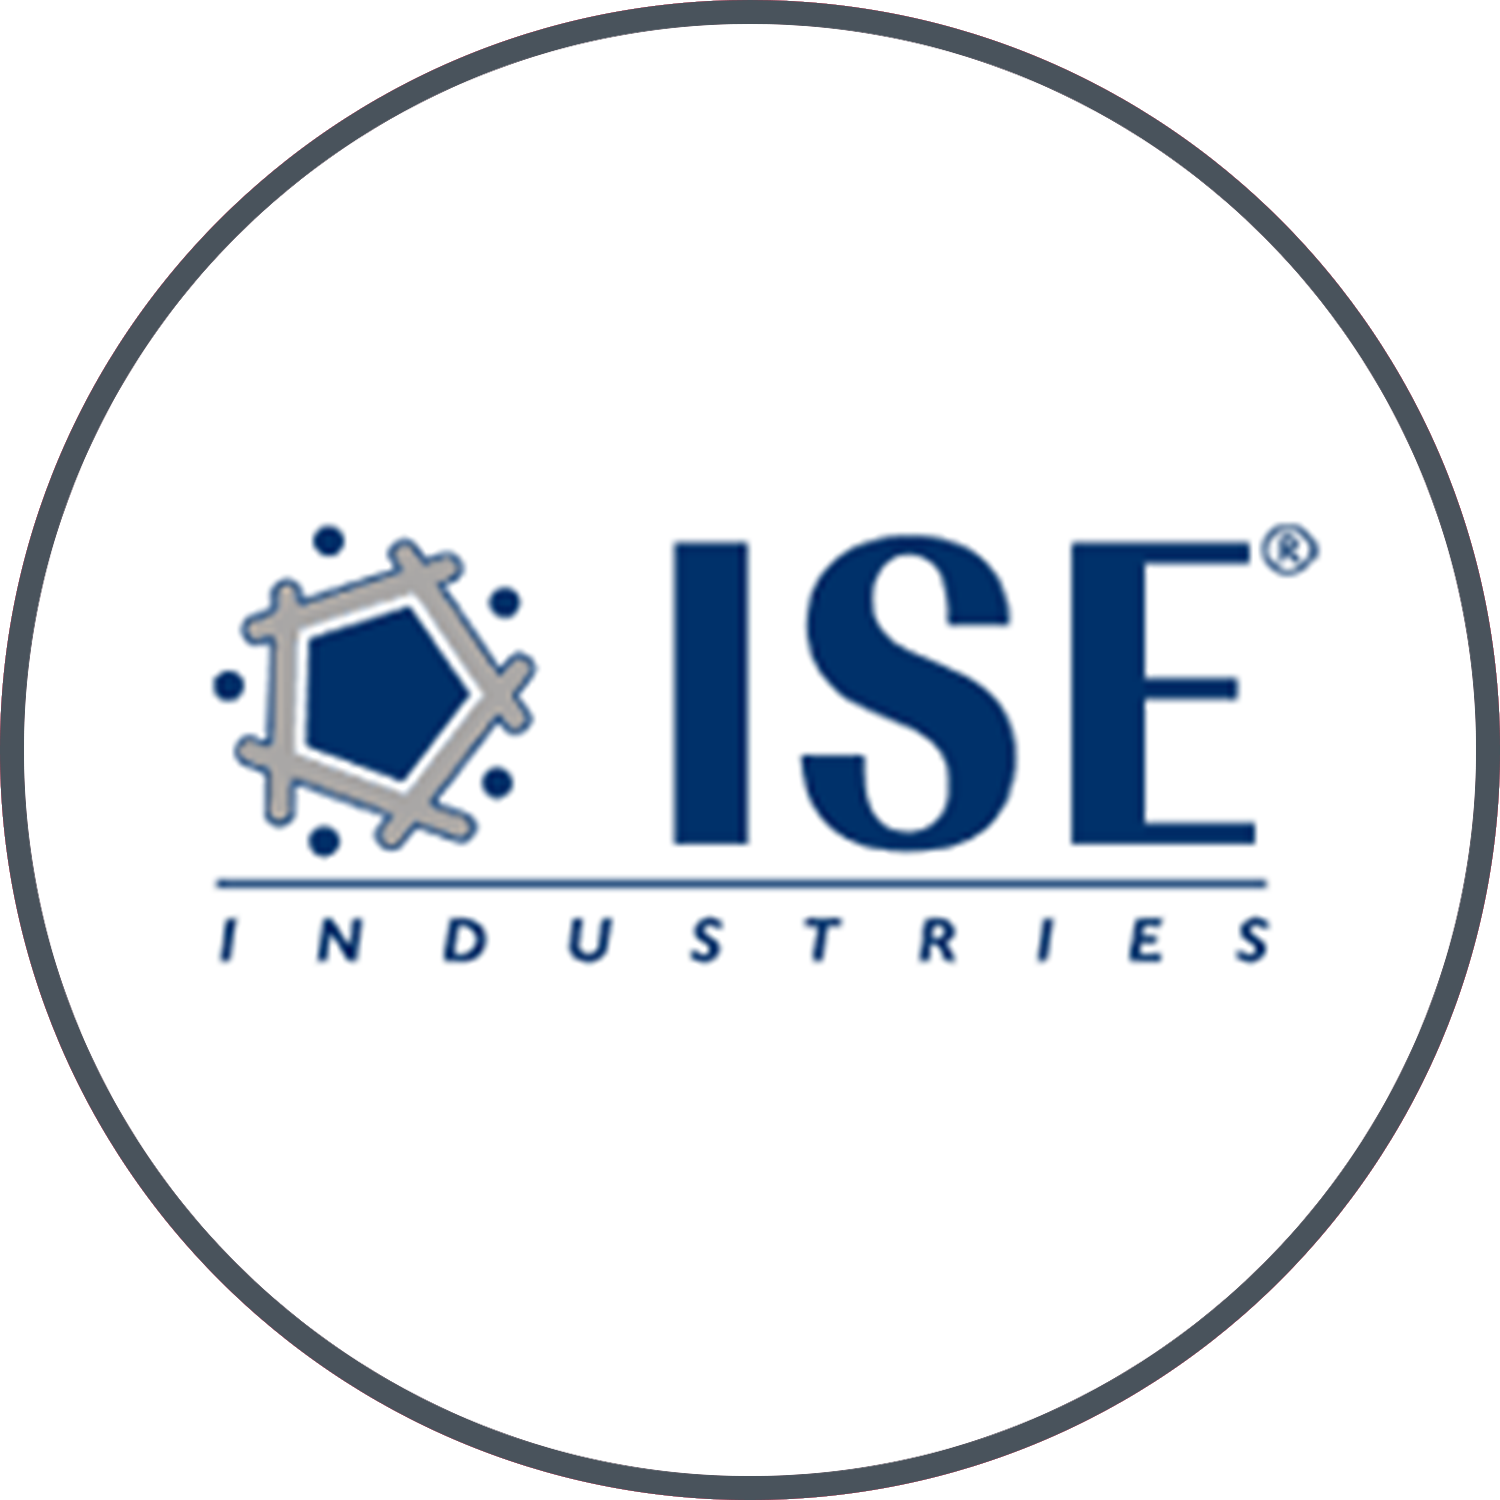 ise-logo.png